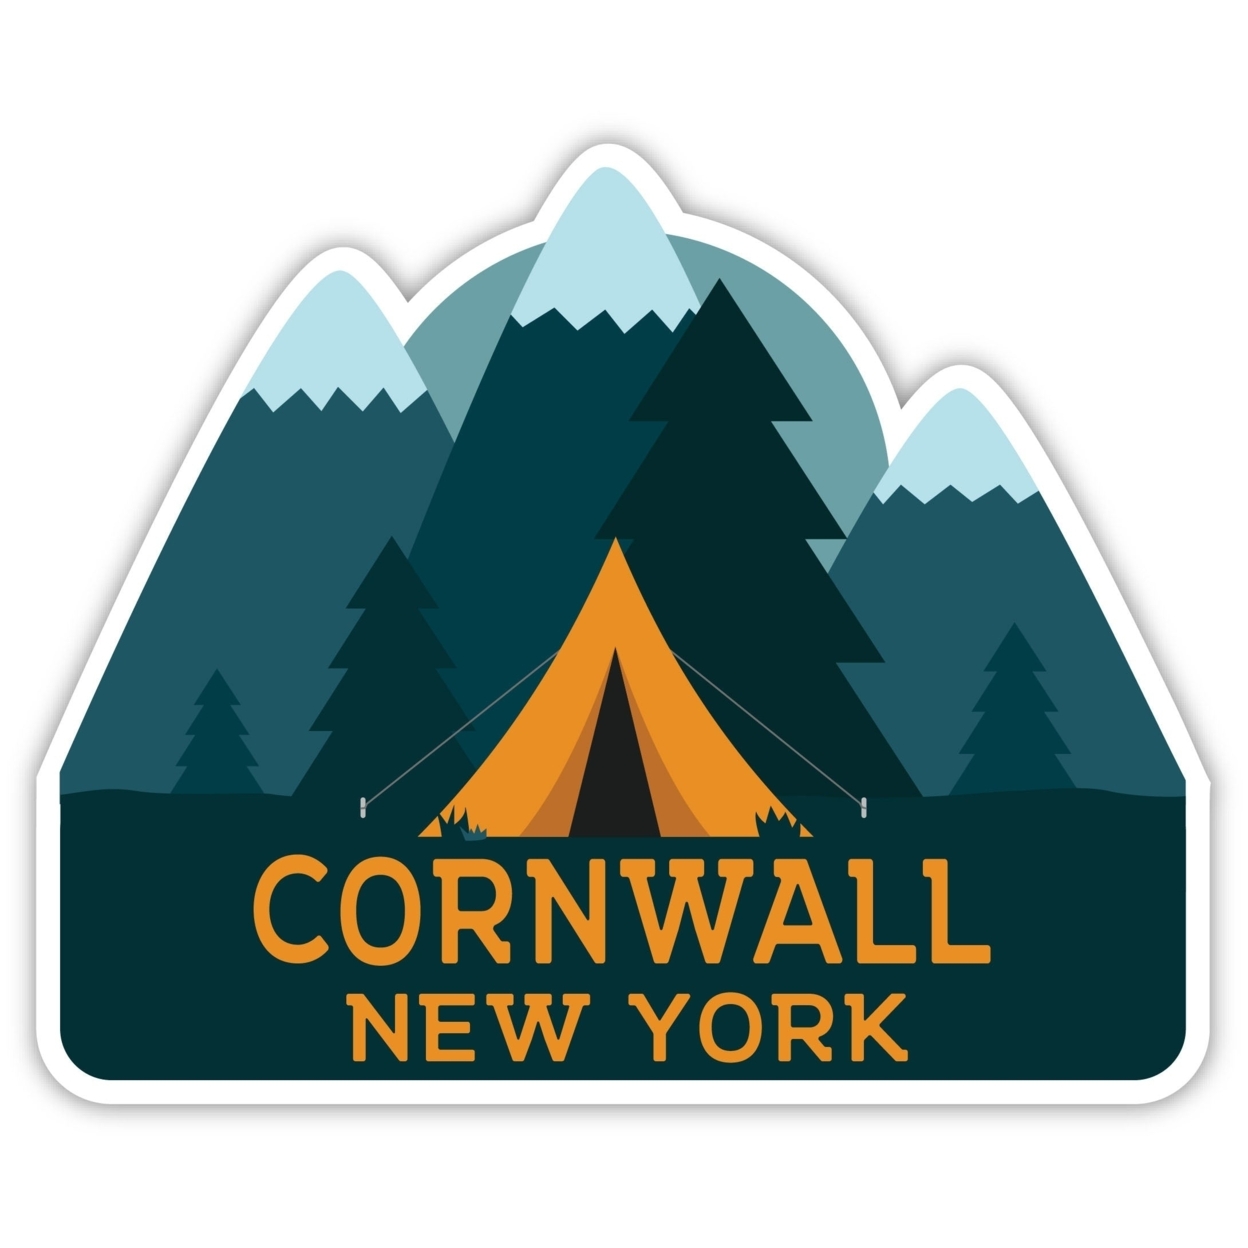 Cornwall New York Souvenir Decorative Stickers (Choose Theme And Size) - Single Unit, 12-Inch, Tent